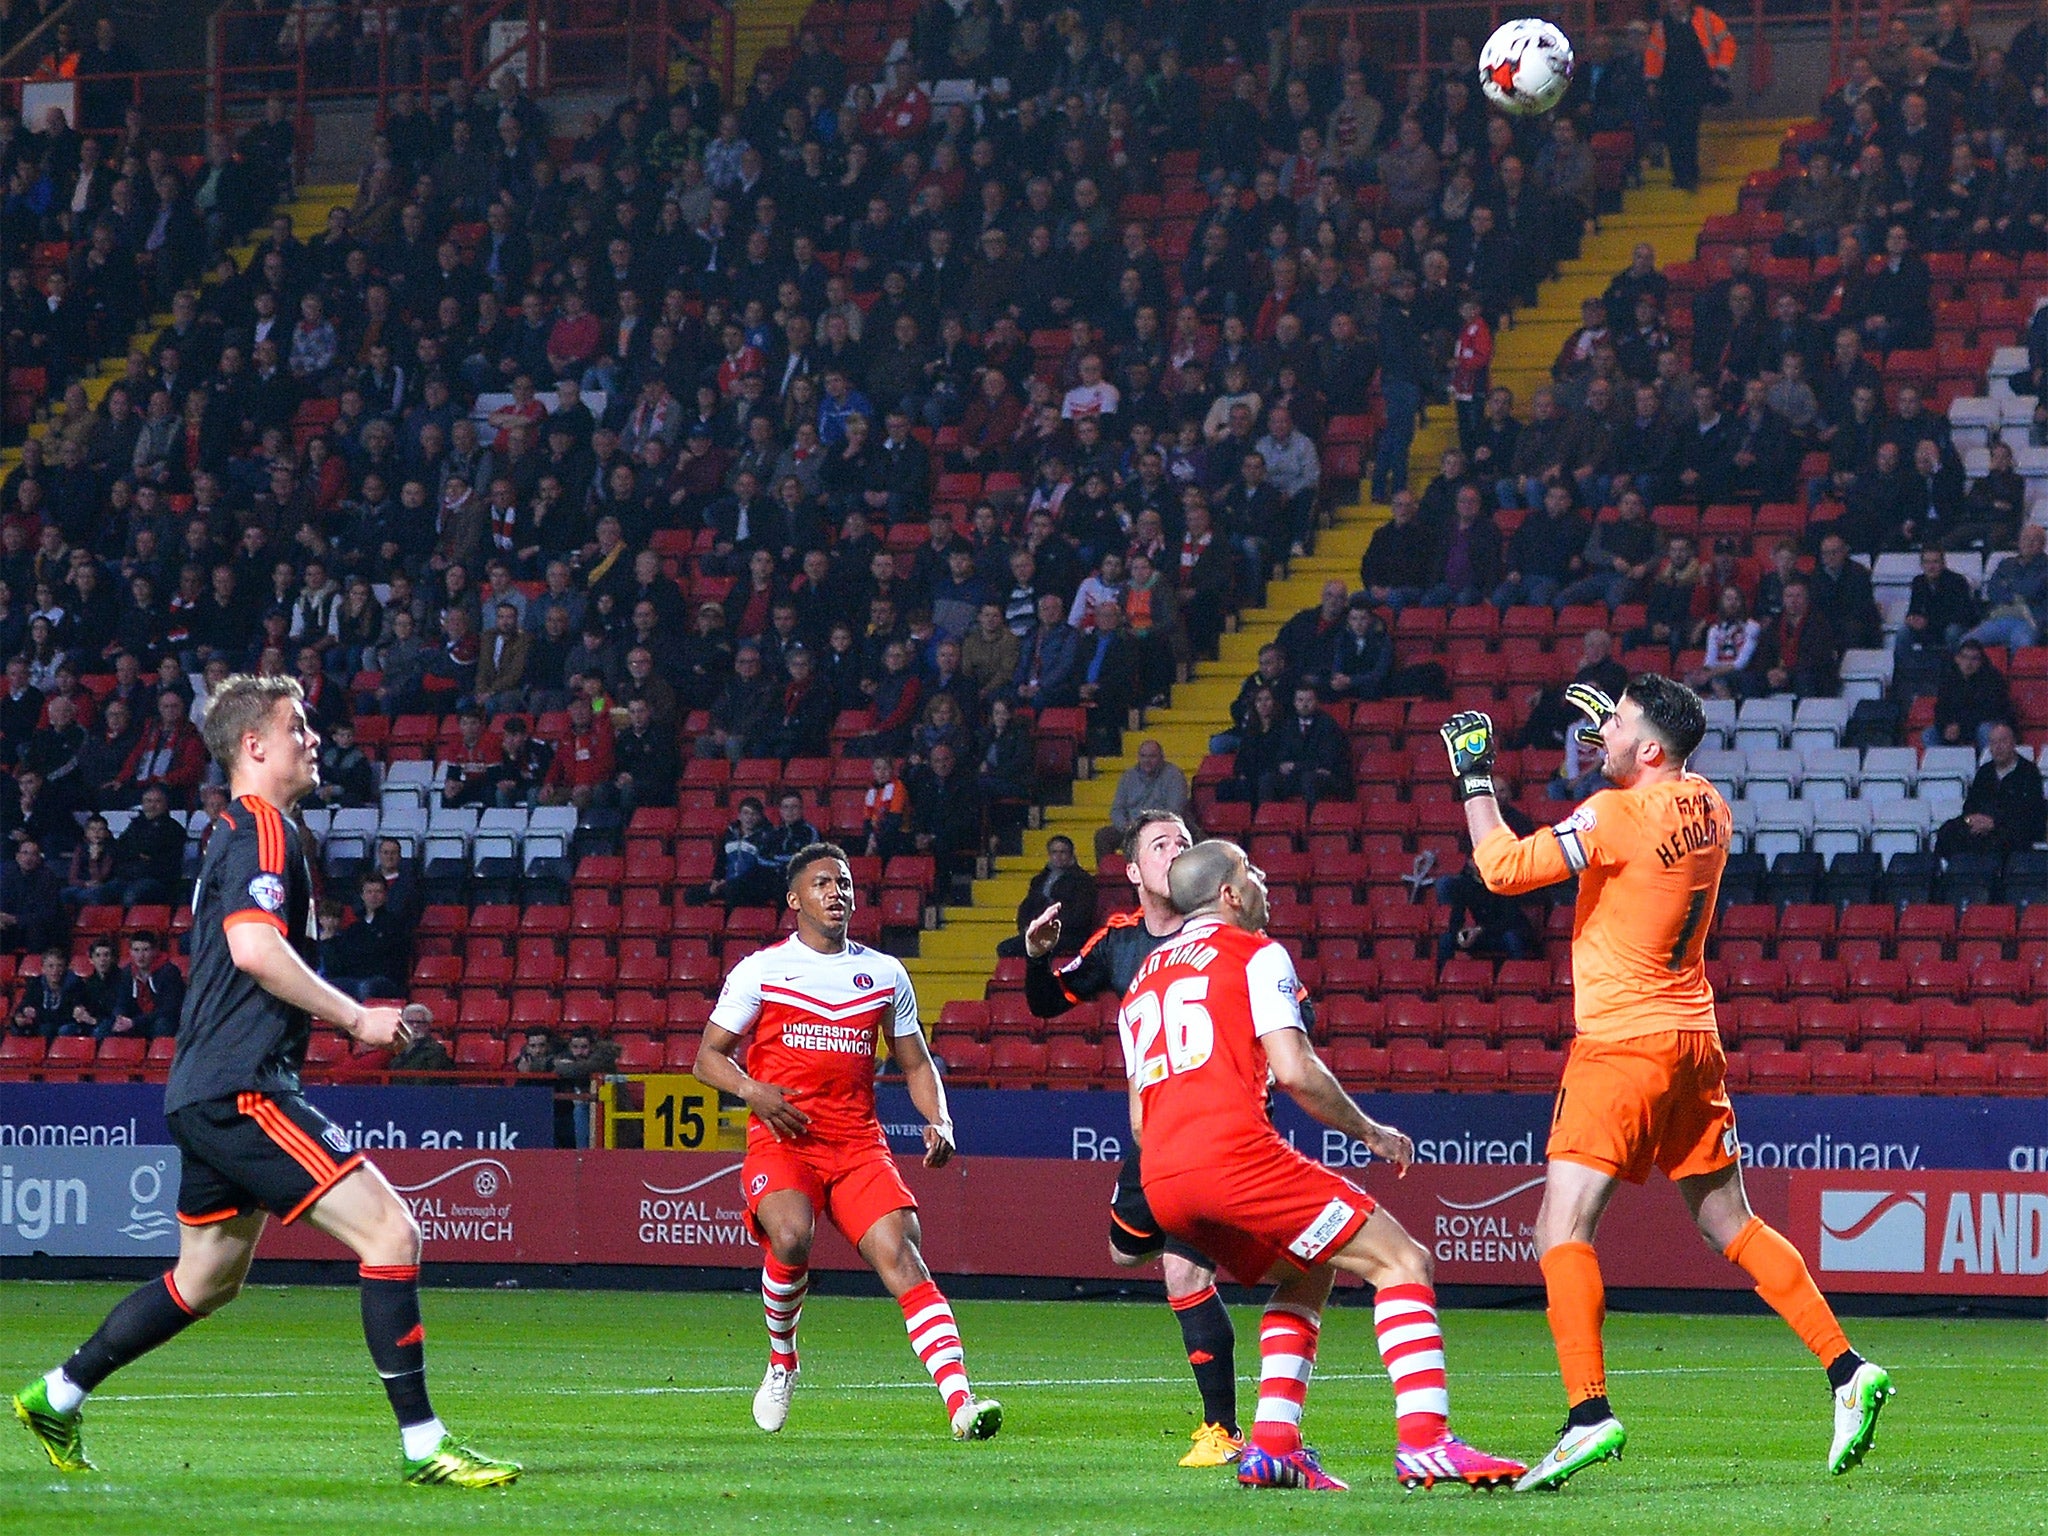 Ross McCormack gives Fulham the lead, looping a header over Charlton keeper Stephen Henderson